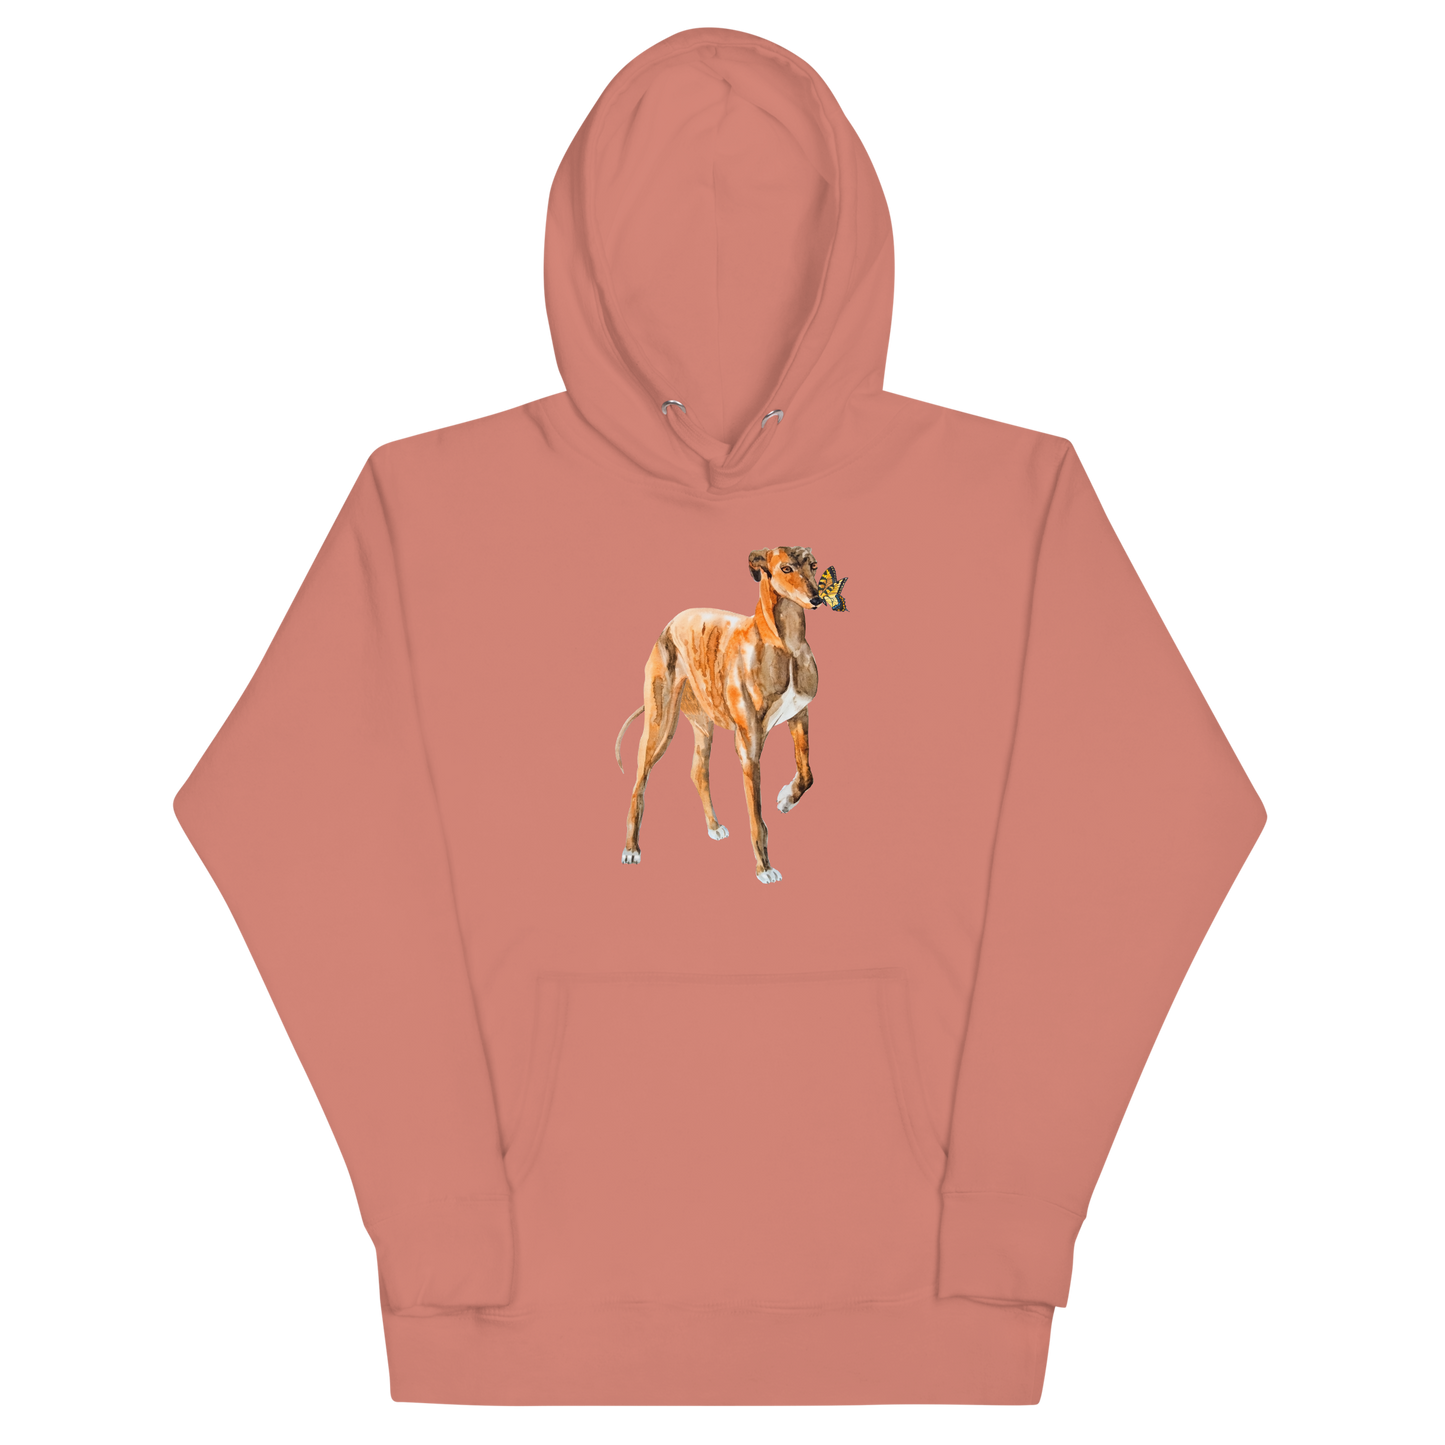 Dusty Rose Premium Greyhound Hoodie featuring an adorable Greyhound And Butterfly graphic on the chest - Cute Graphic Greyhound Hoodies - Boozy Fox